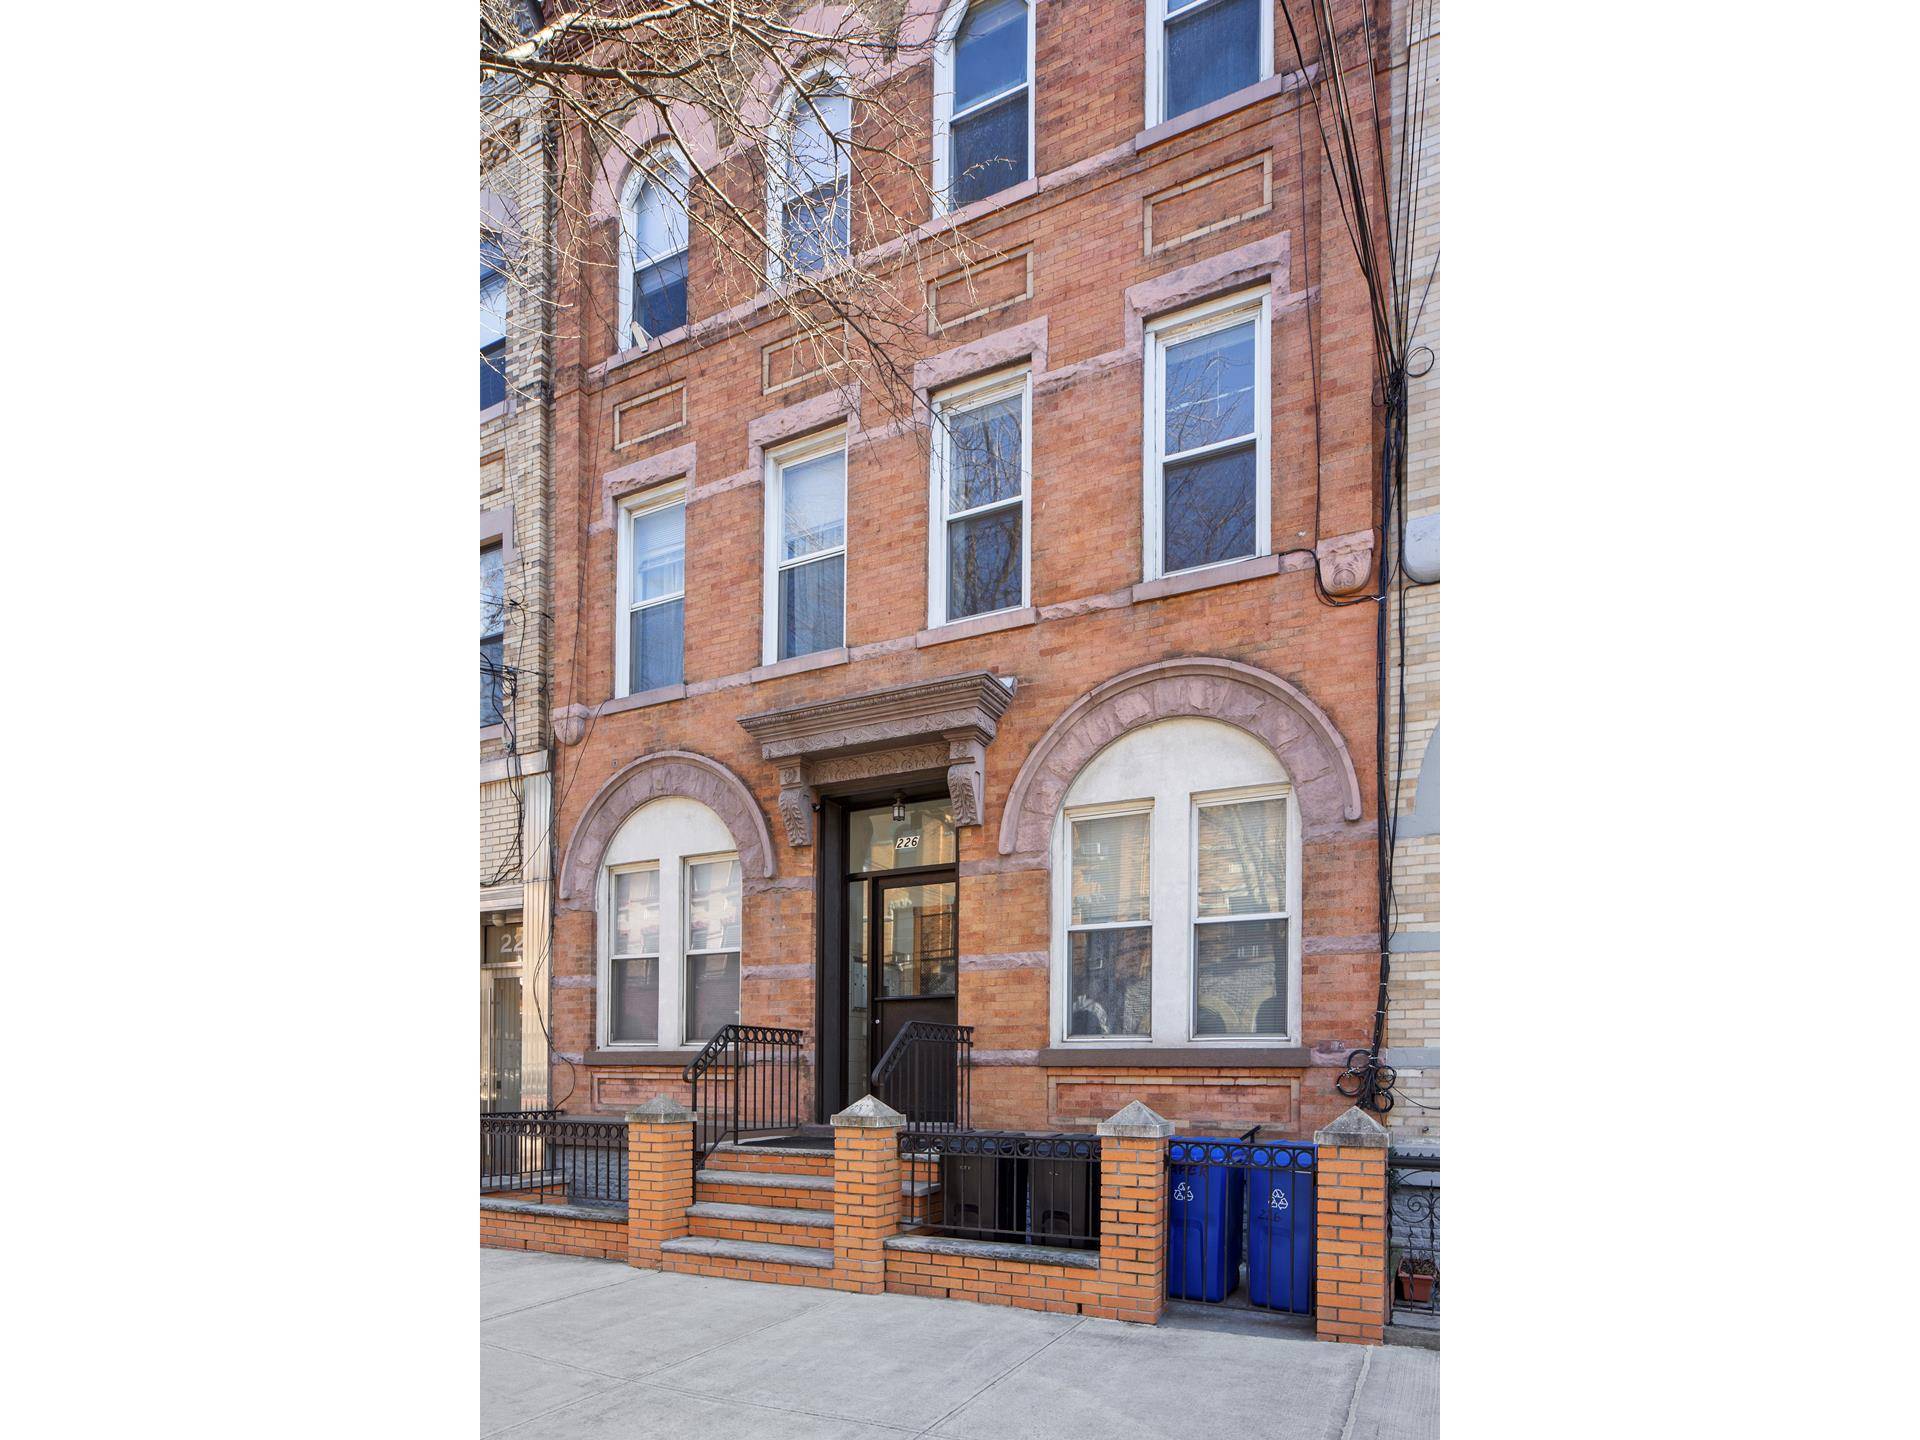 Welcome to 226 Kingsland Ave, 6 unit, brick house nestled on a quiet residential block just around the corner with McGolrick Park, and a few blocks from McCarren Park and ...